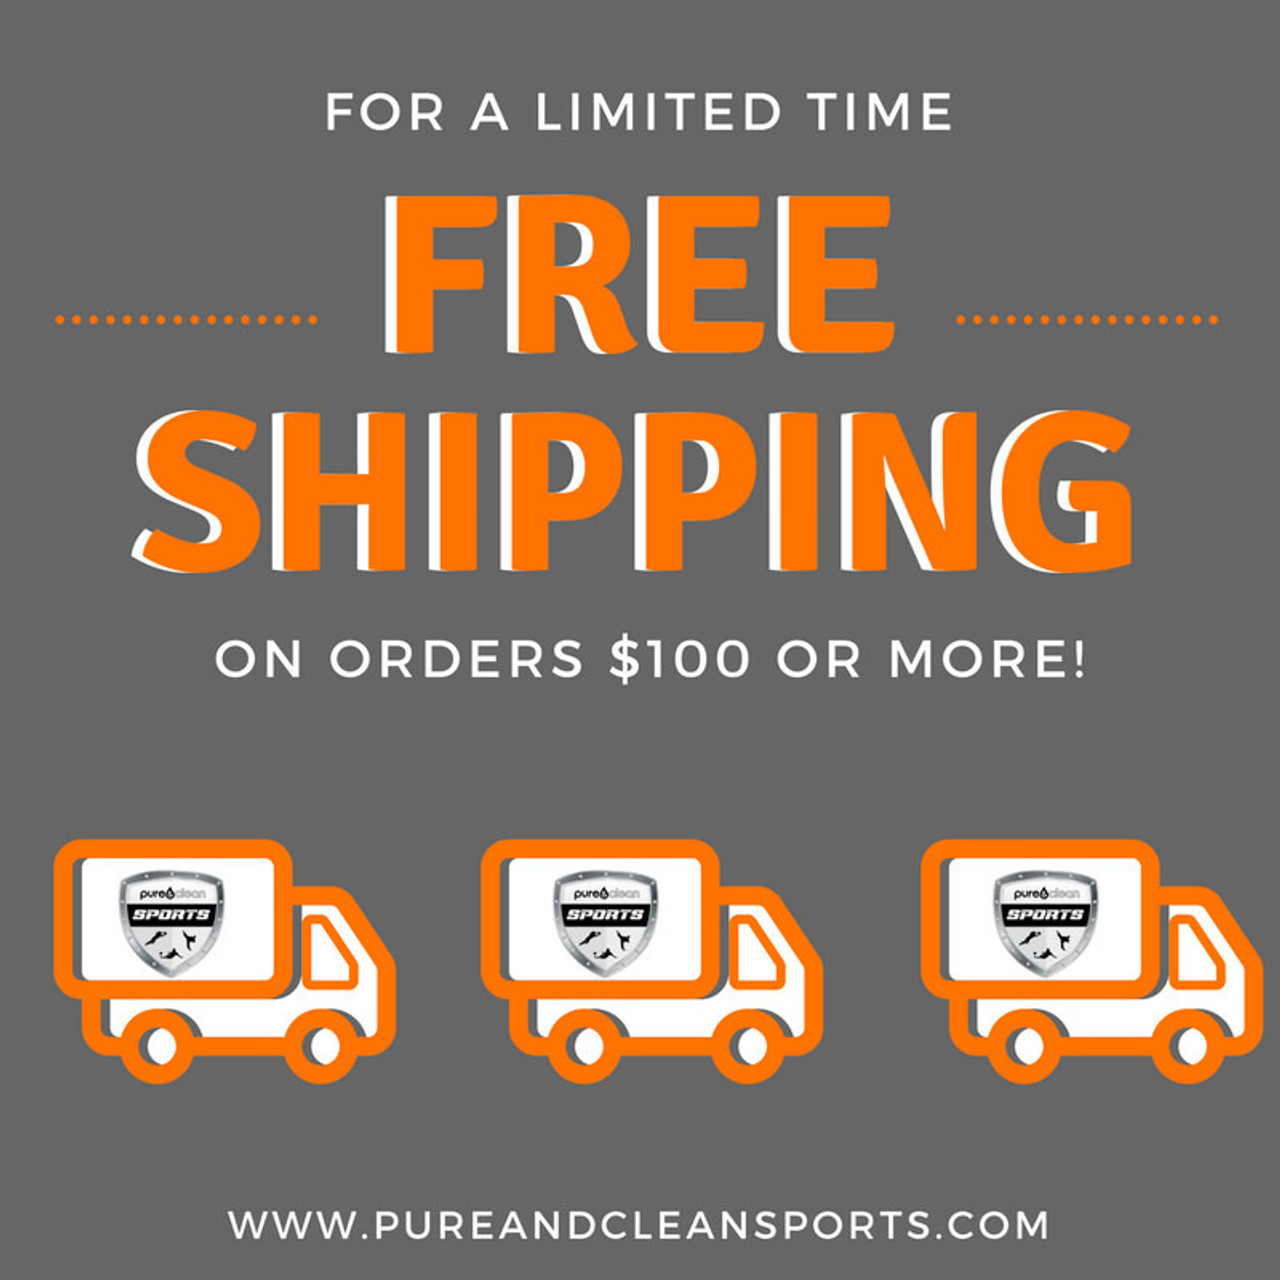 Free shipping on orders over $100 in the lower 48